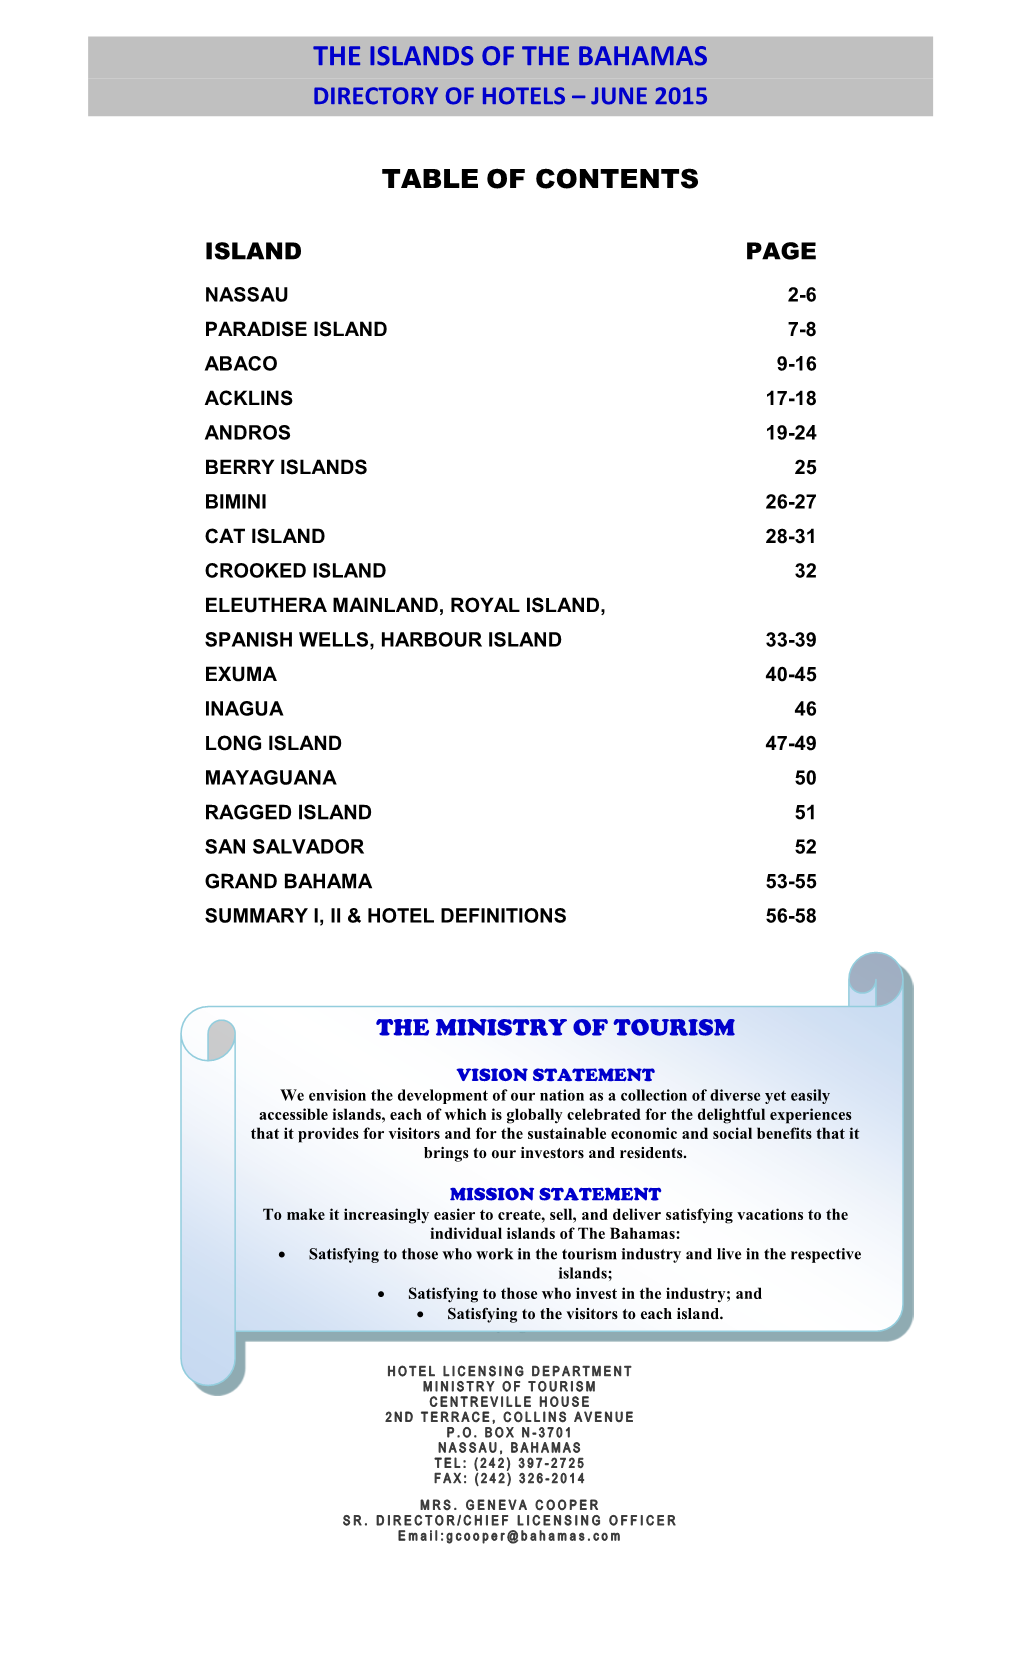 The Islands of the Bahamas Directory of Hotels – June 2015